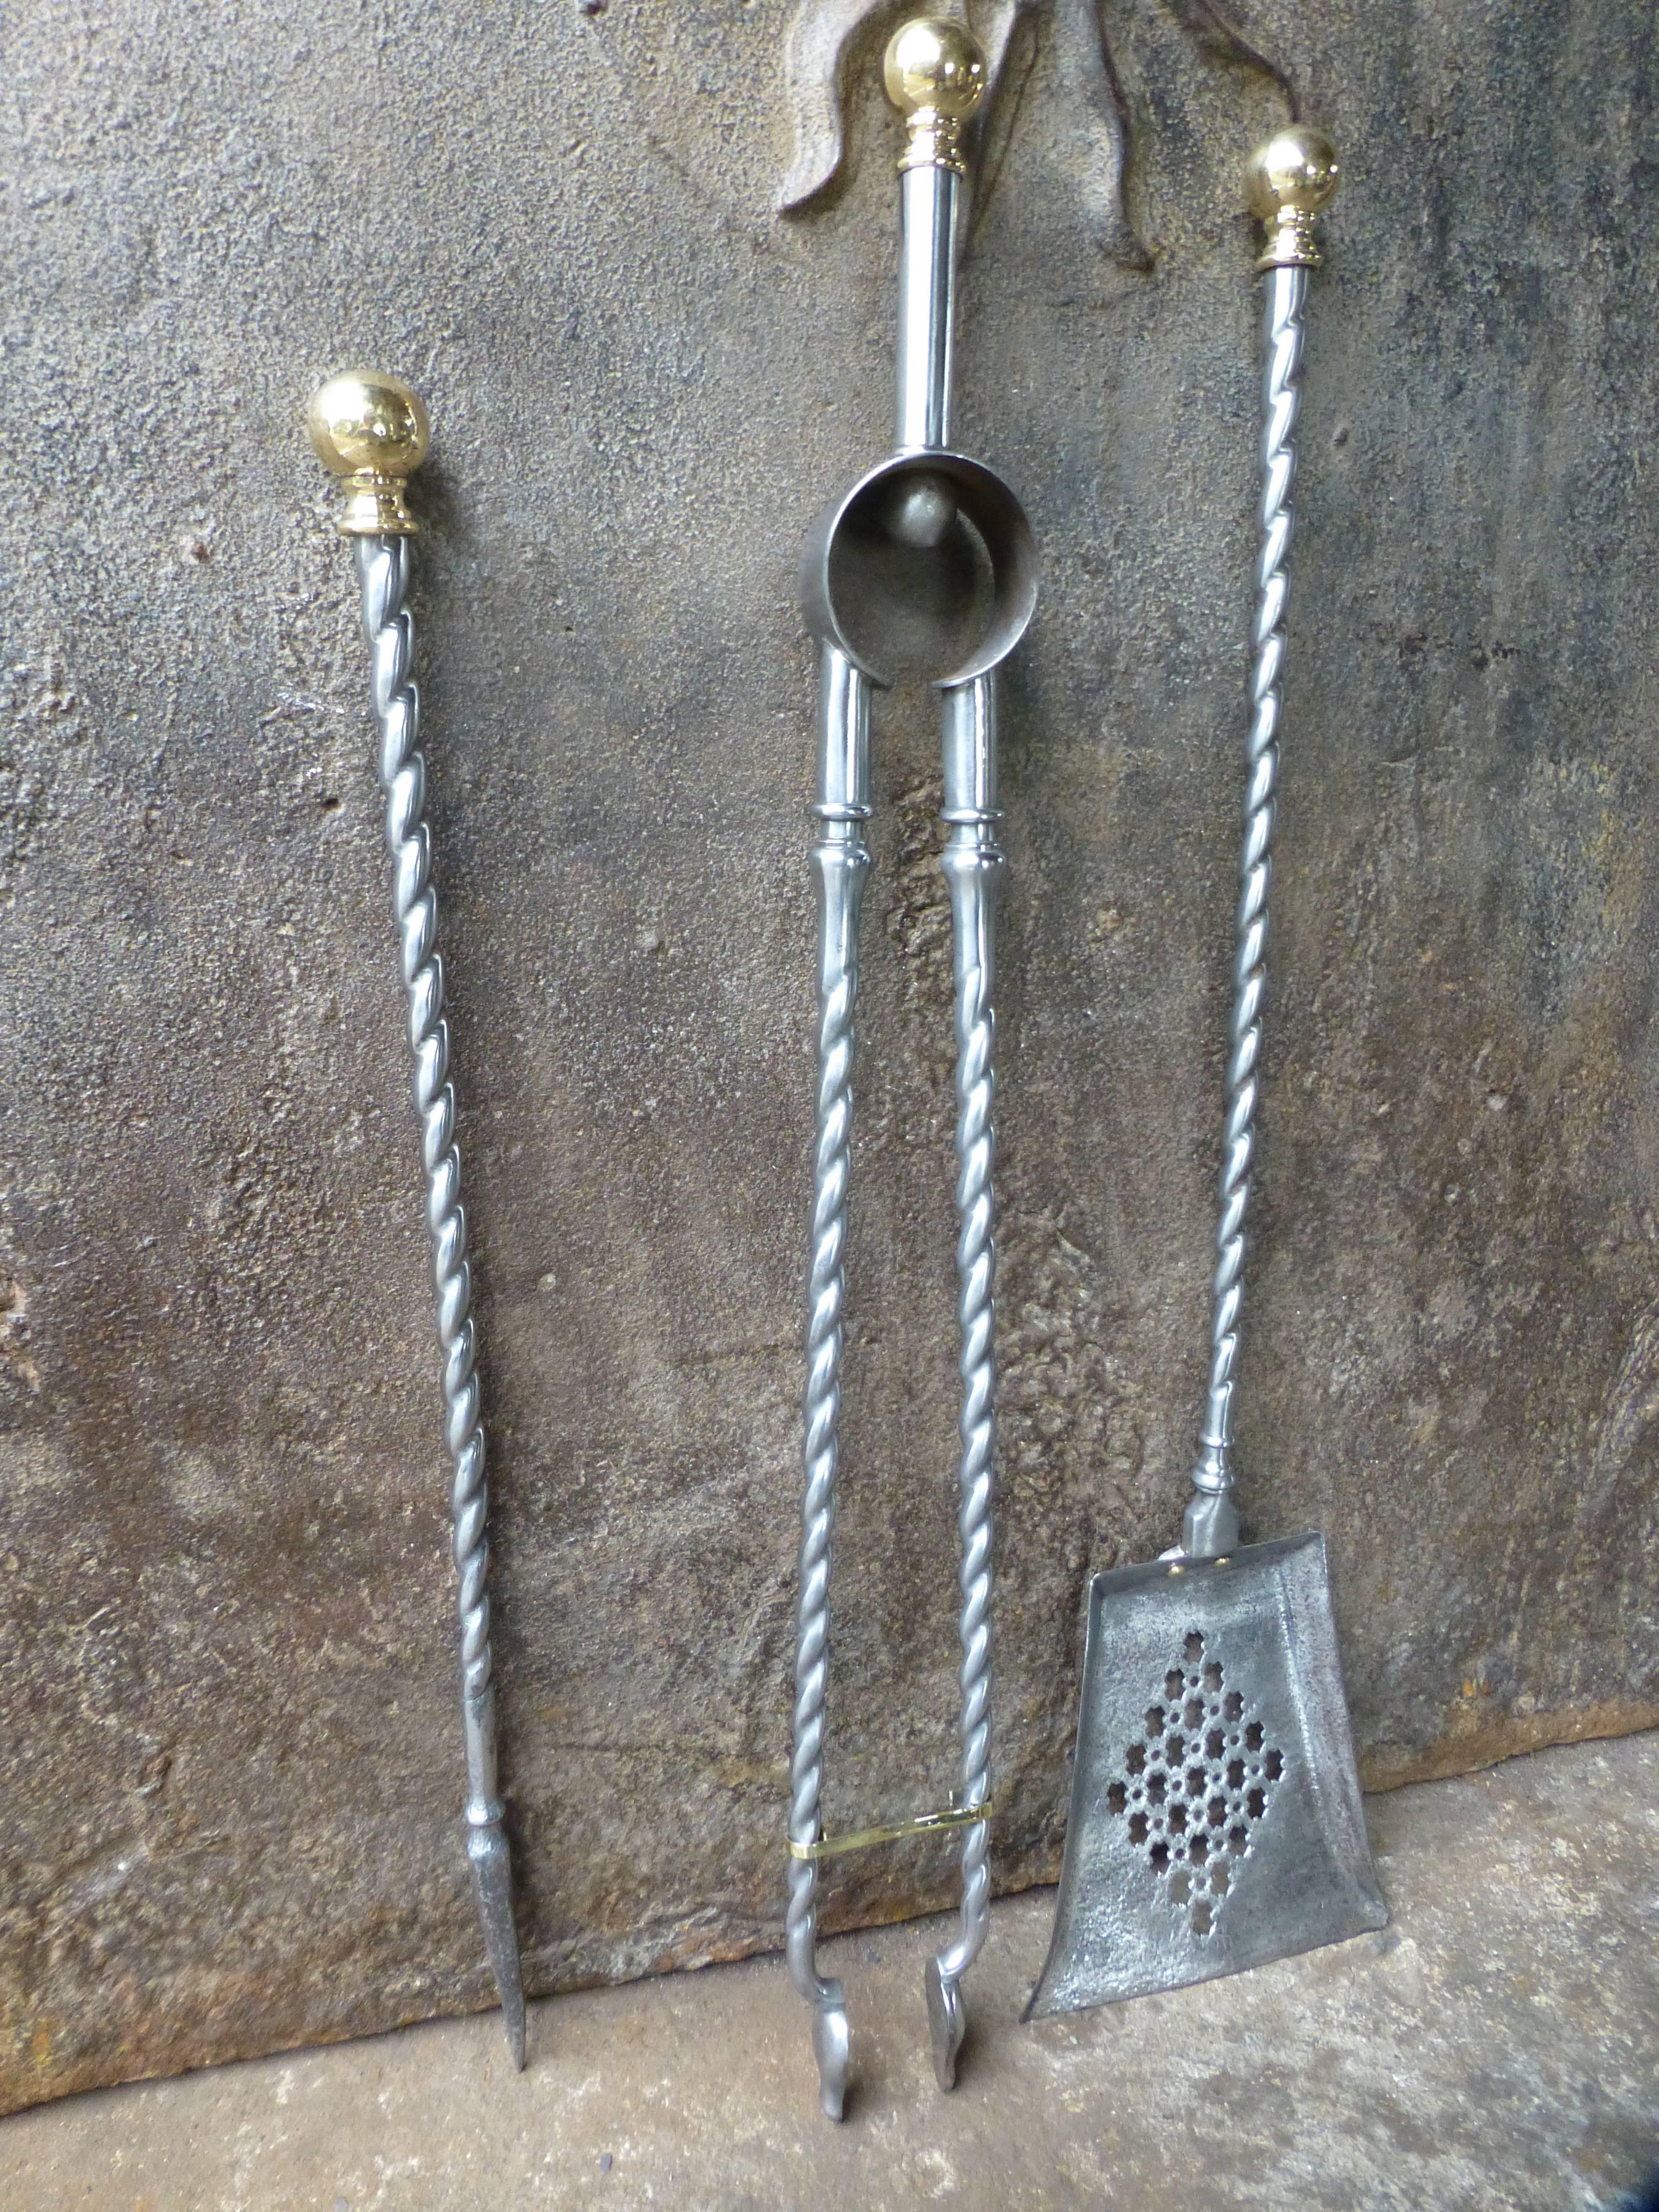 19th century English set of fire tools, fire irons made of polished steel with brass handles. Victorian period. The fireplace toolset is in a good condition.

